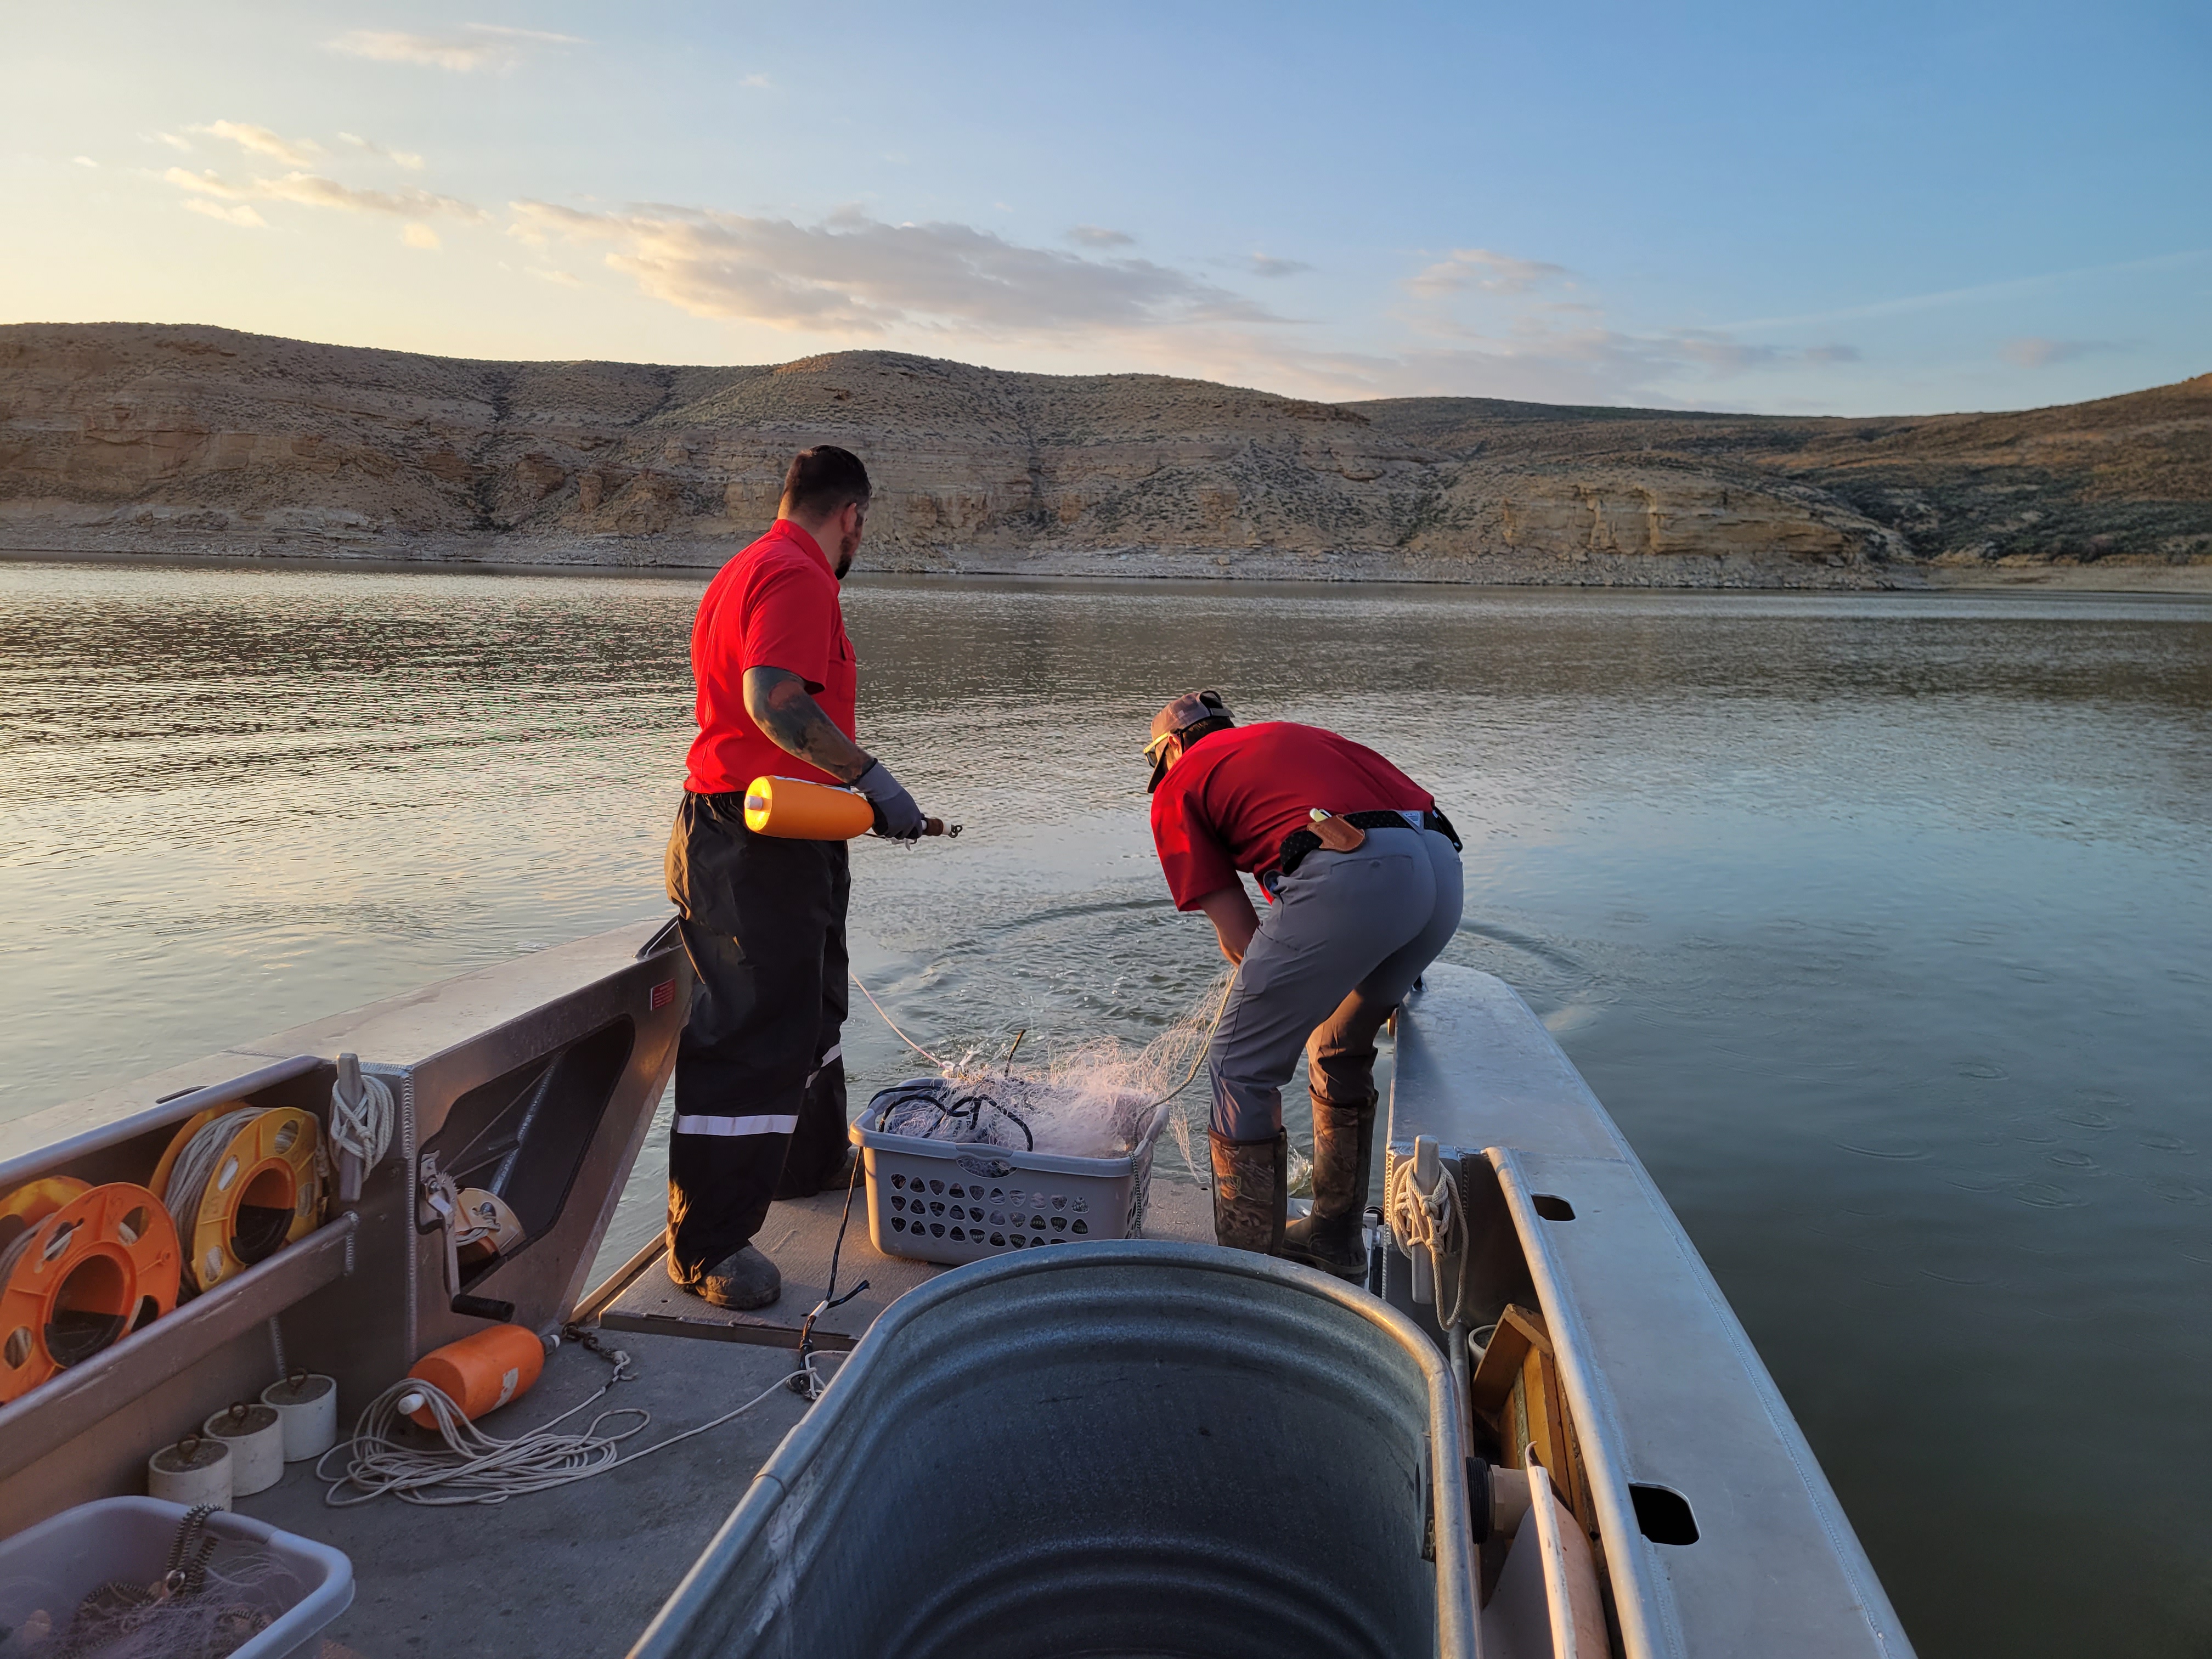 Wyoming Game and Fish Department - Managing the fishery at Flaming